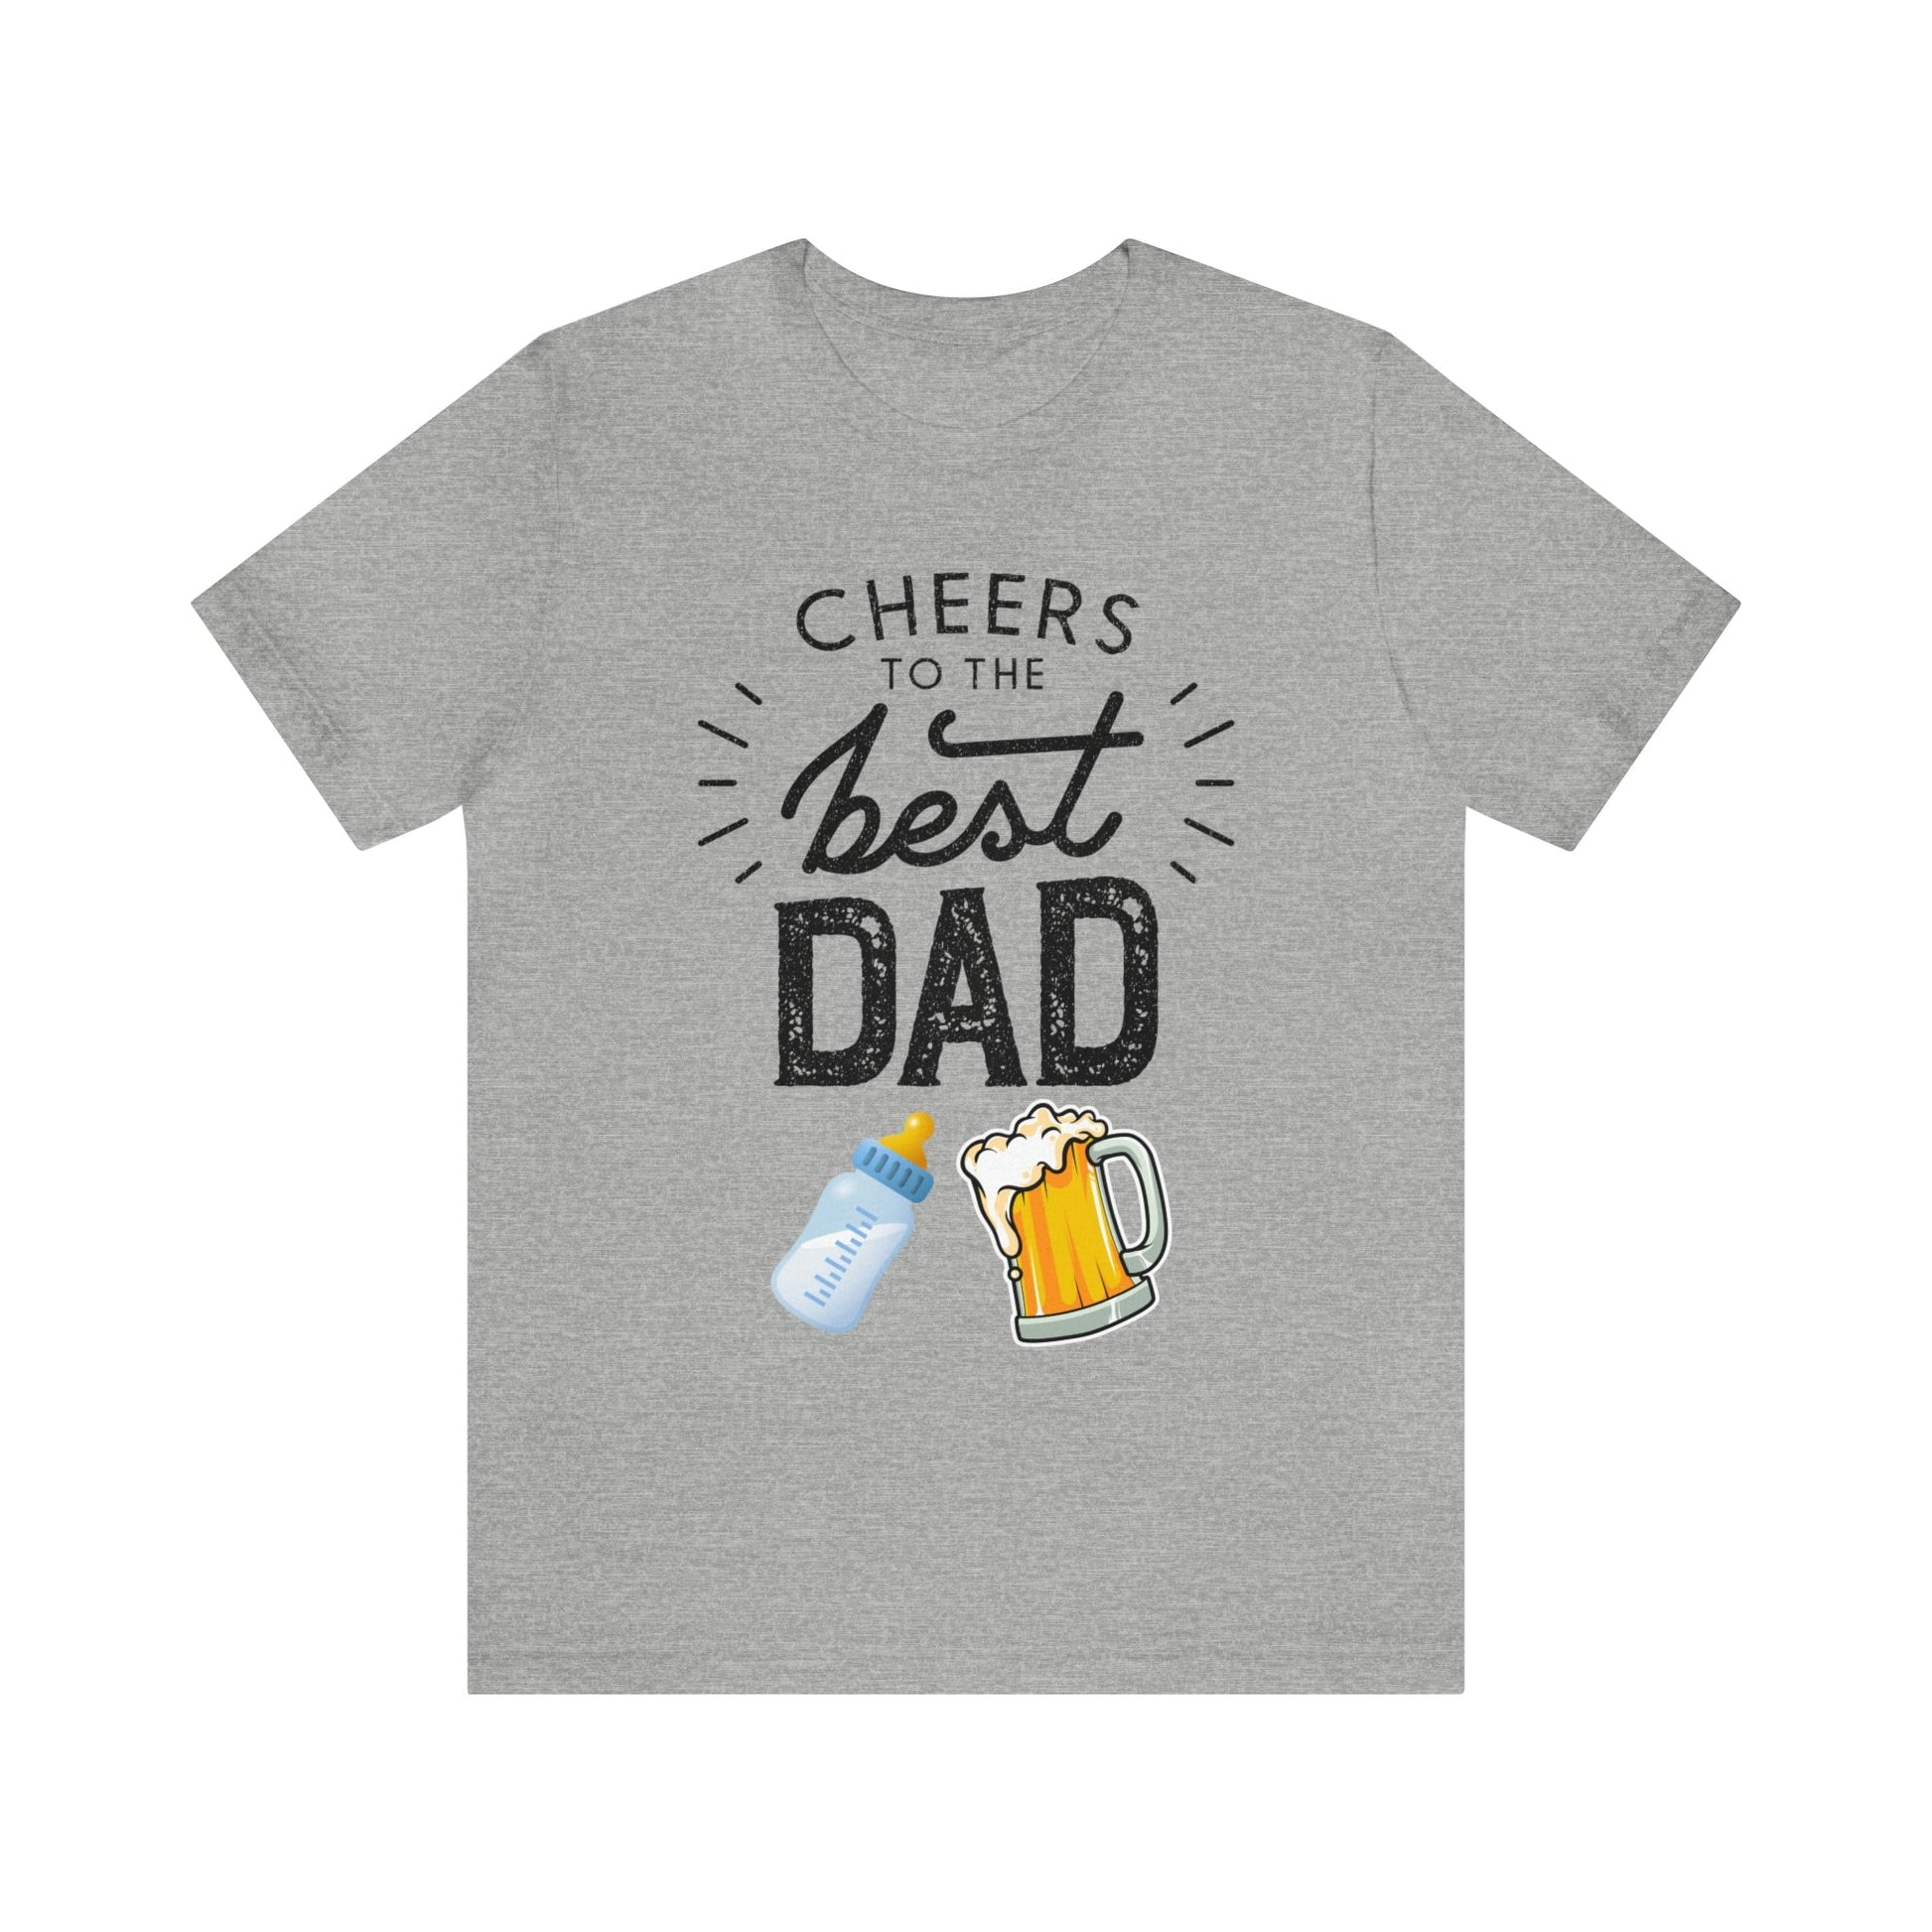 Cheers to The Best DAD T-Shirt-T-Shirt-Athletic Heather-S-mysticalcherry